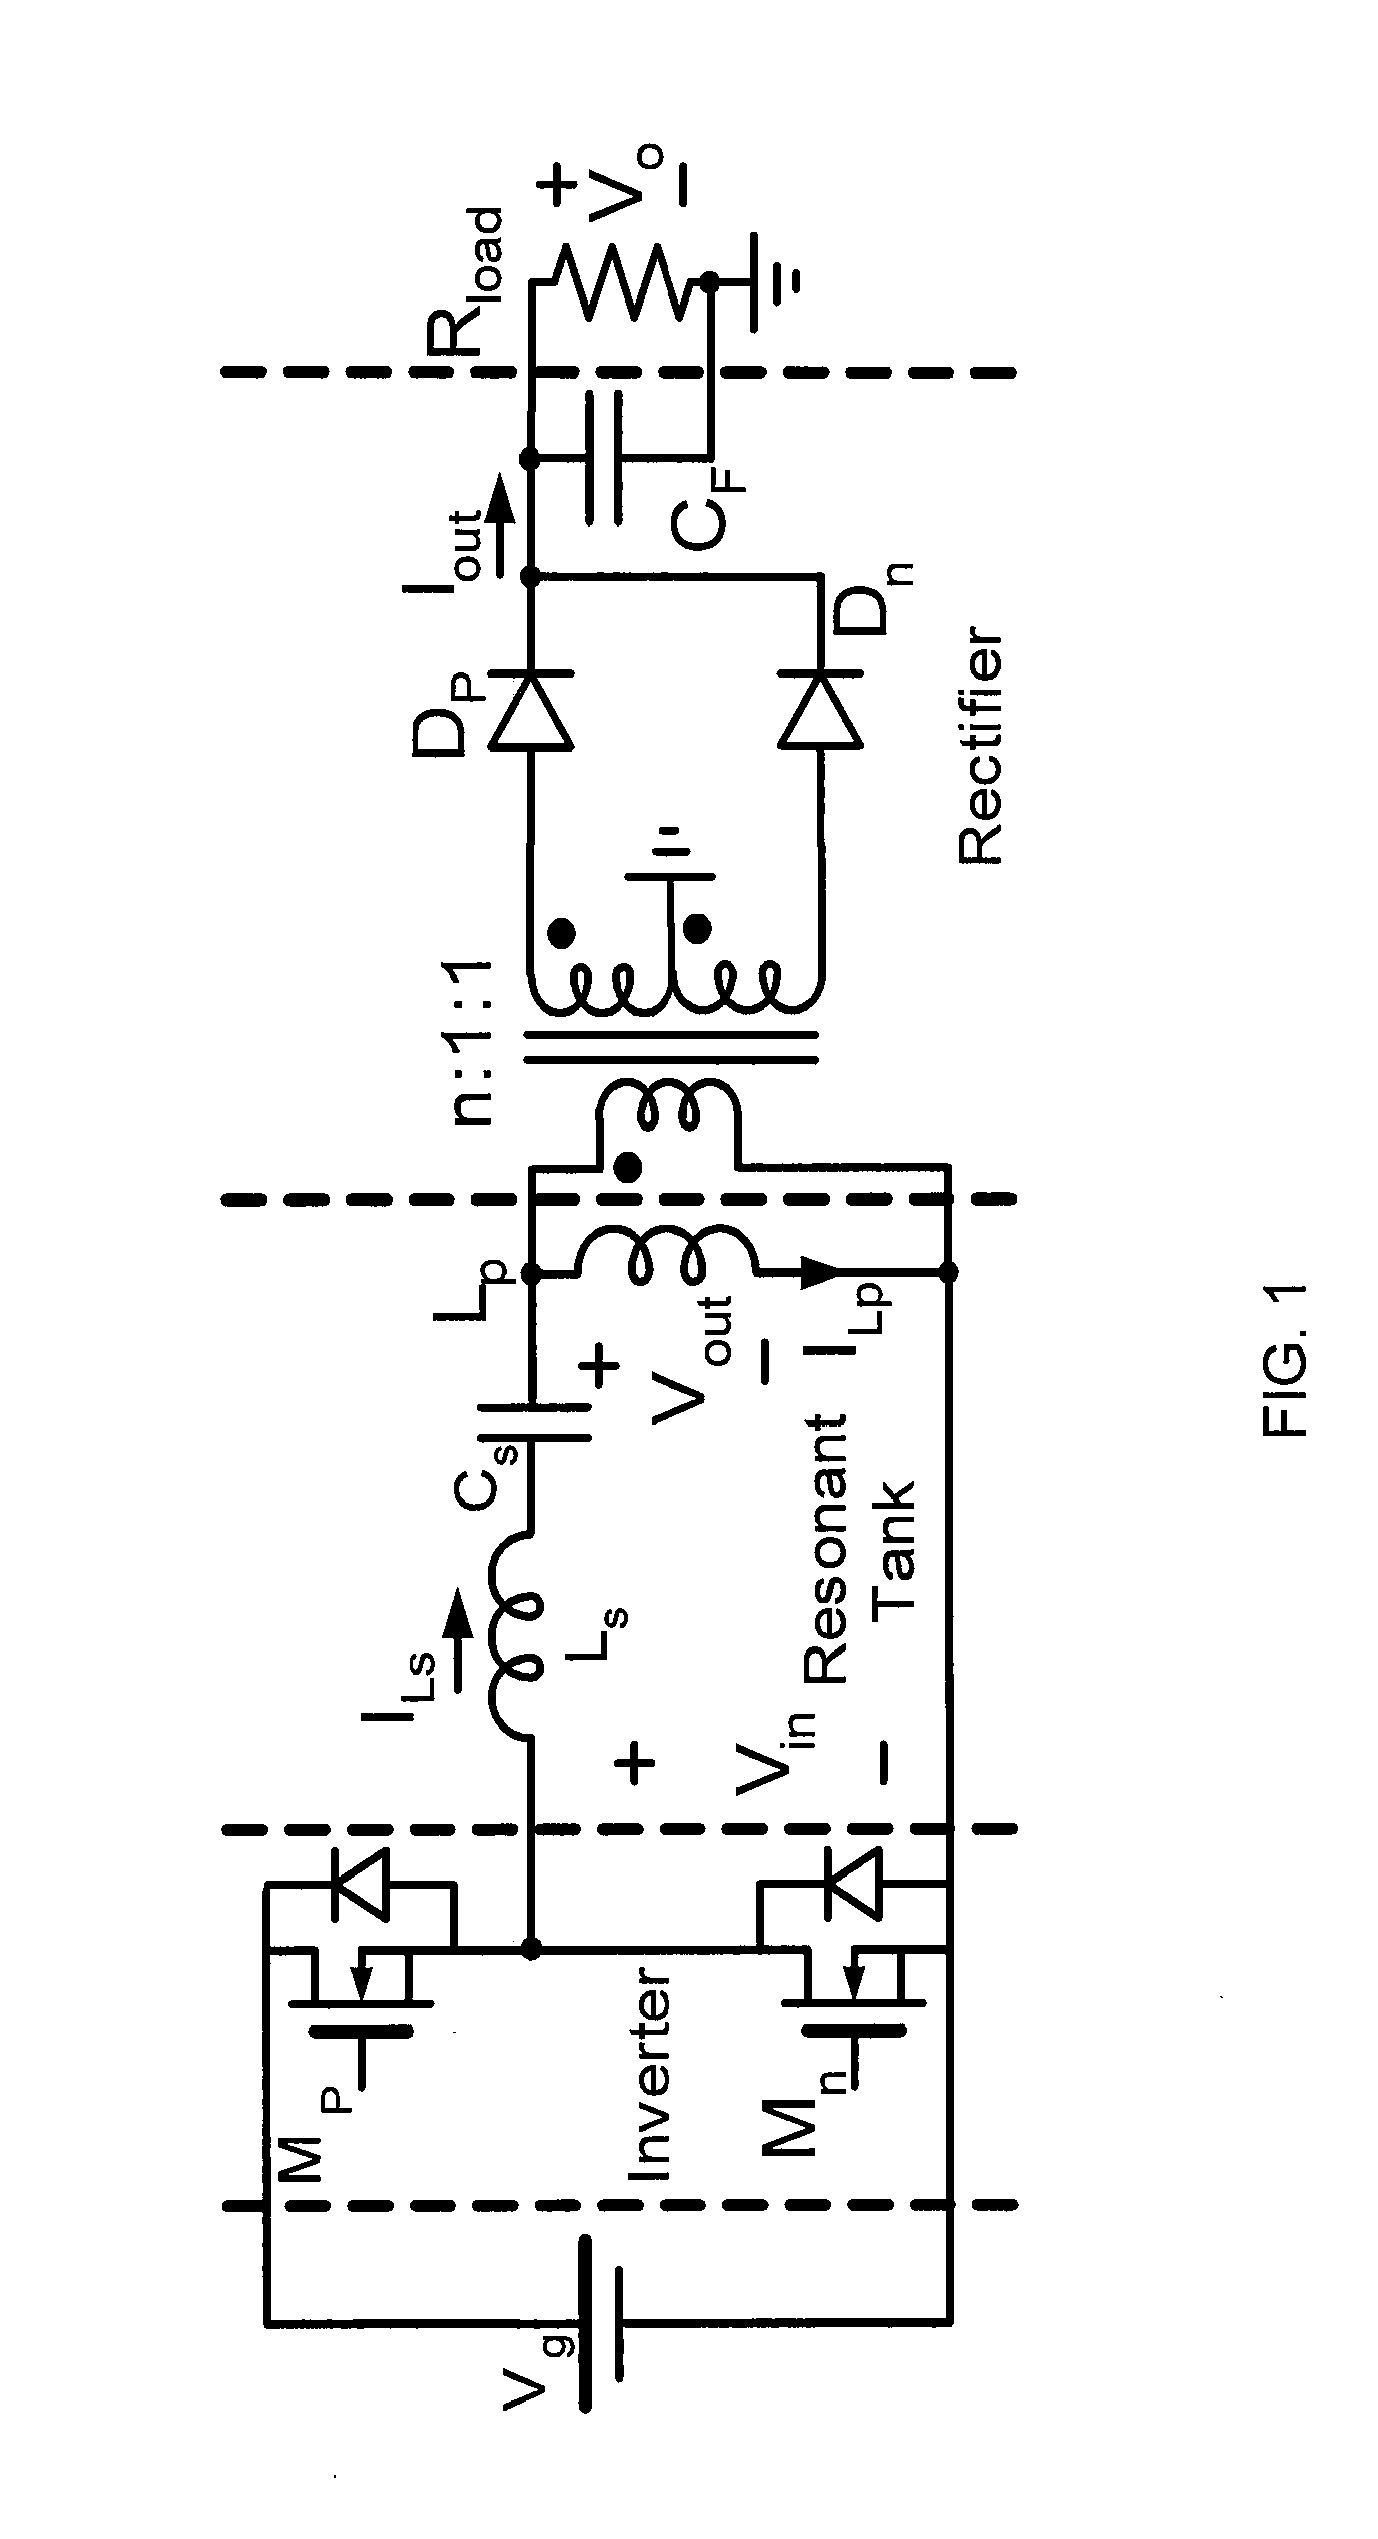 Multiphase resonant converter for dc-dc applications